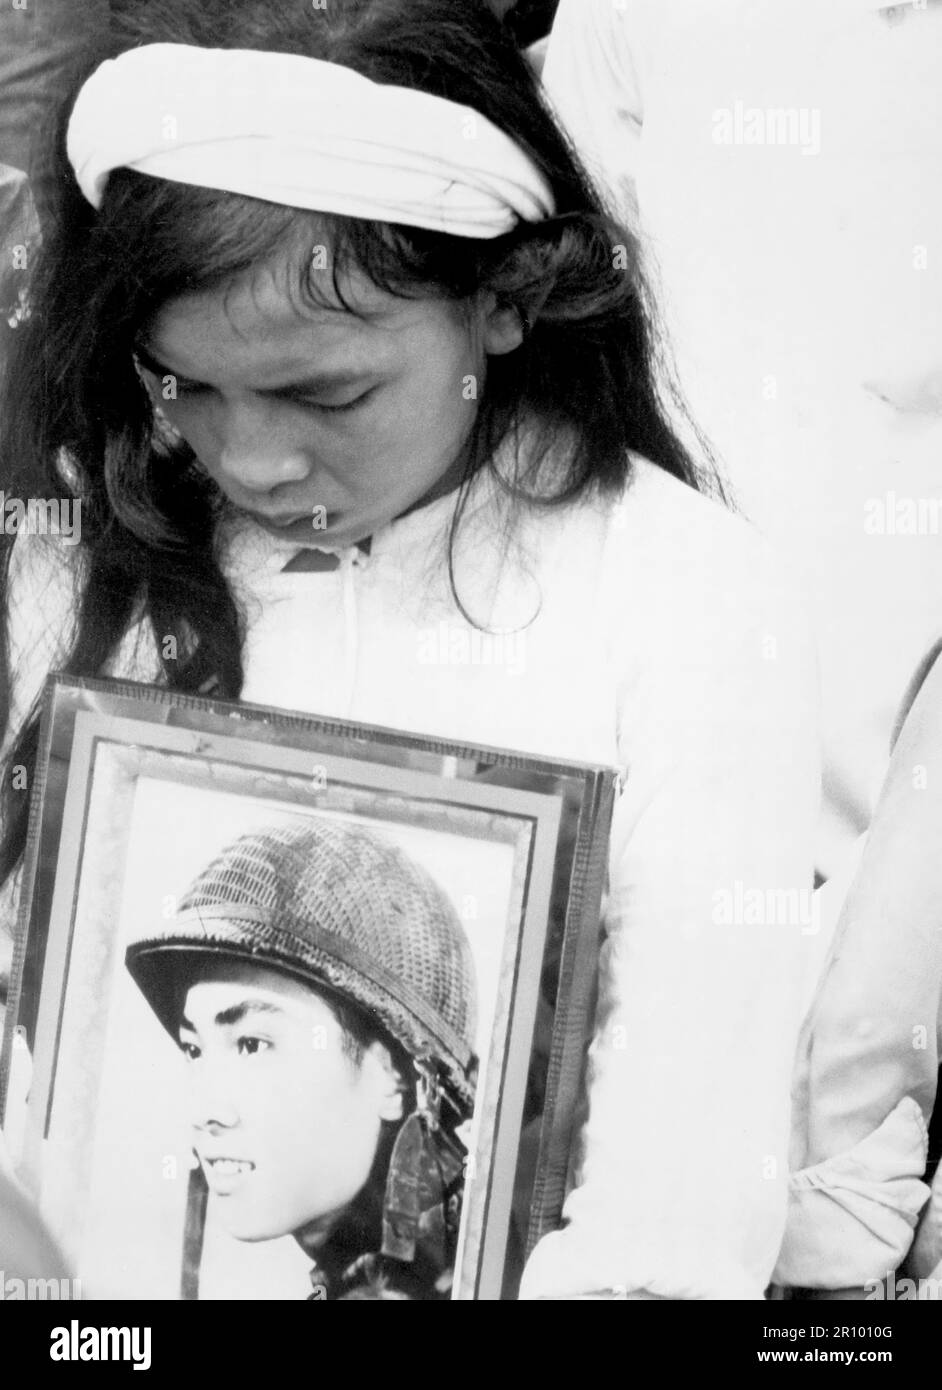 Almost 400 men, women and children massacred by the Viet Cong during 'Tet 1968' were mourned at a common-grave burial on October 14.  This young widow, carrying a photograph of her missing husband, mourns at the mass funeral service in Hue. Stock Photo